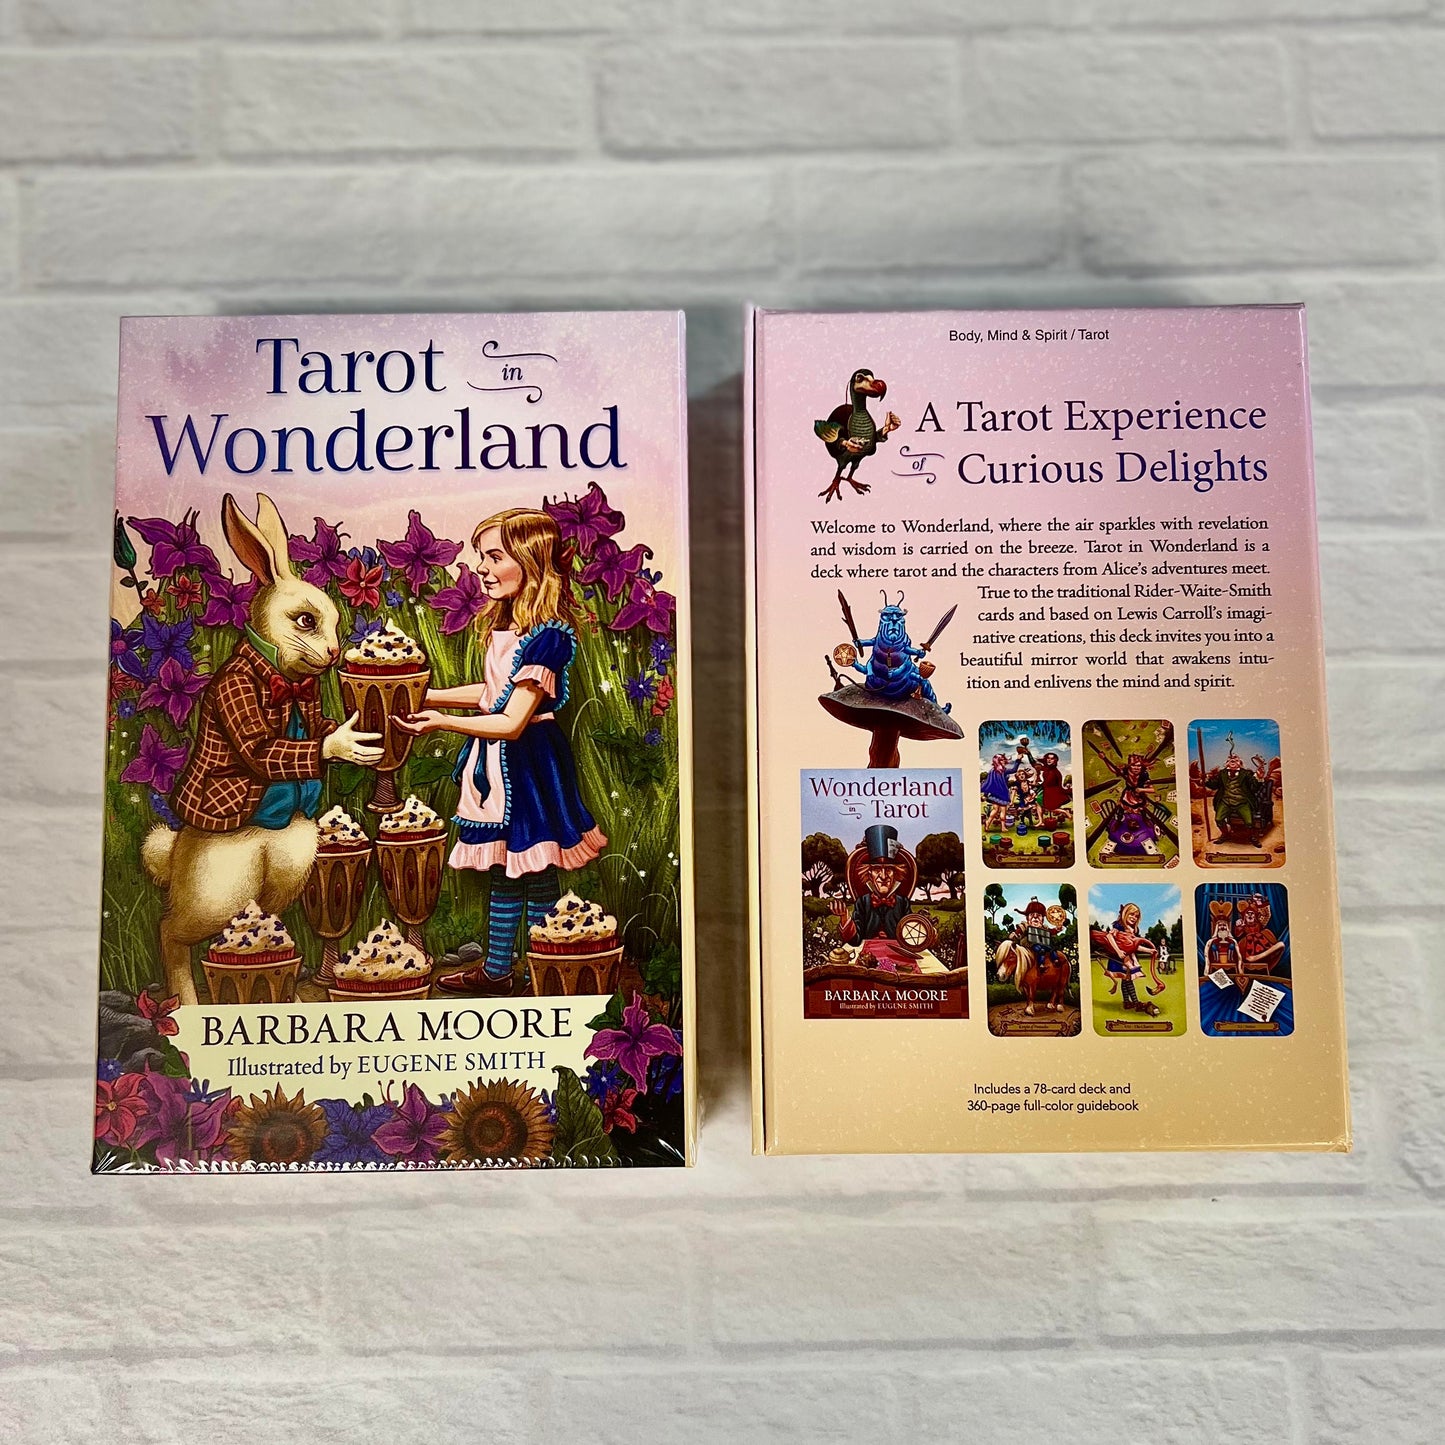 Tarot in Wonderland by Barbara Moore (Illustrated by Eugene Smith)